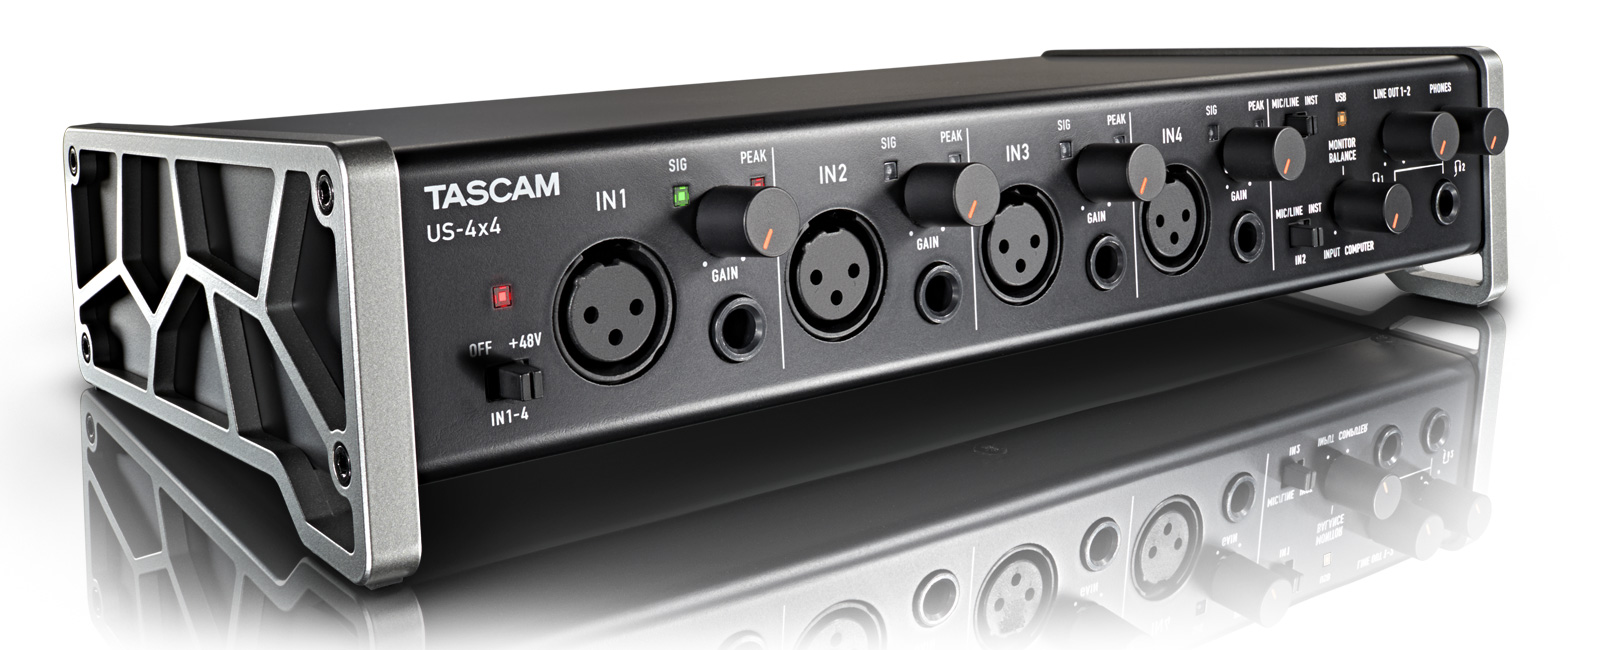 Tascam US-4x4 USB Audio Interface with Xpix Dynamic Condenser Microphone and Deluxe Bundle 